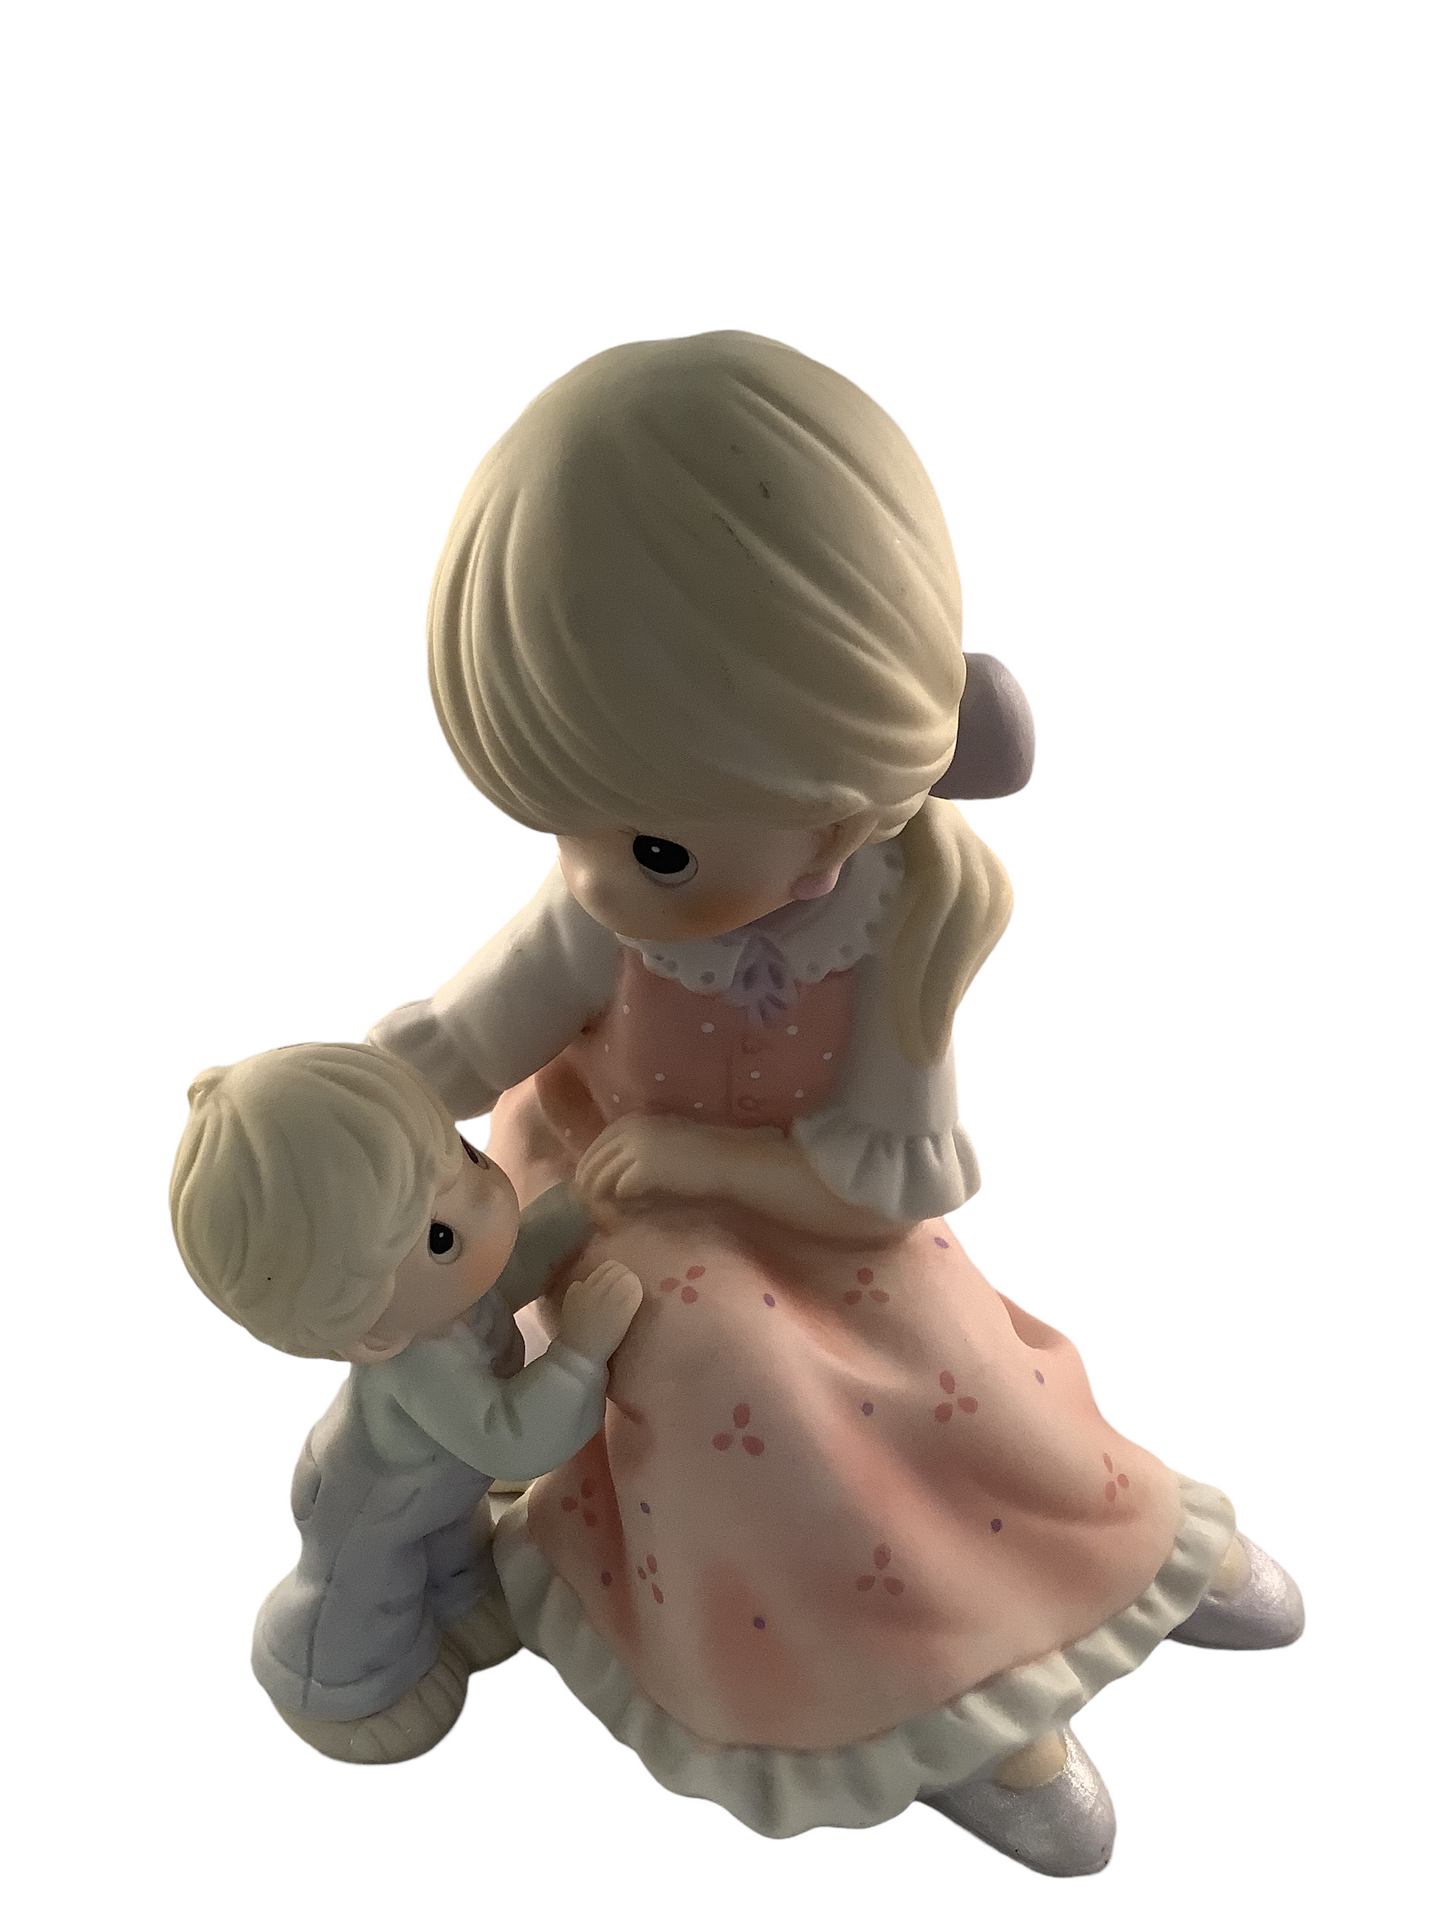 A Mother's Arms Are Always Open - Precious Moment Figurine